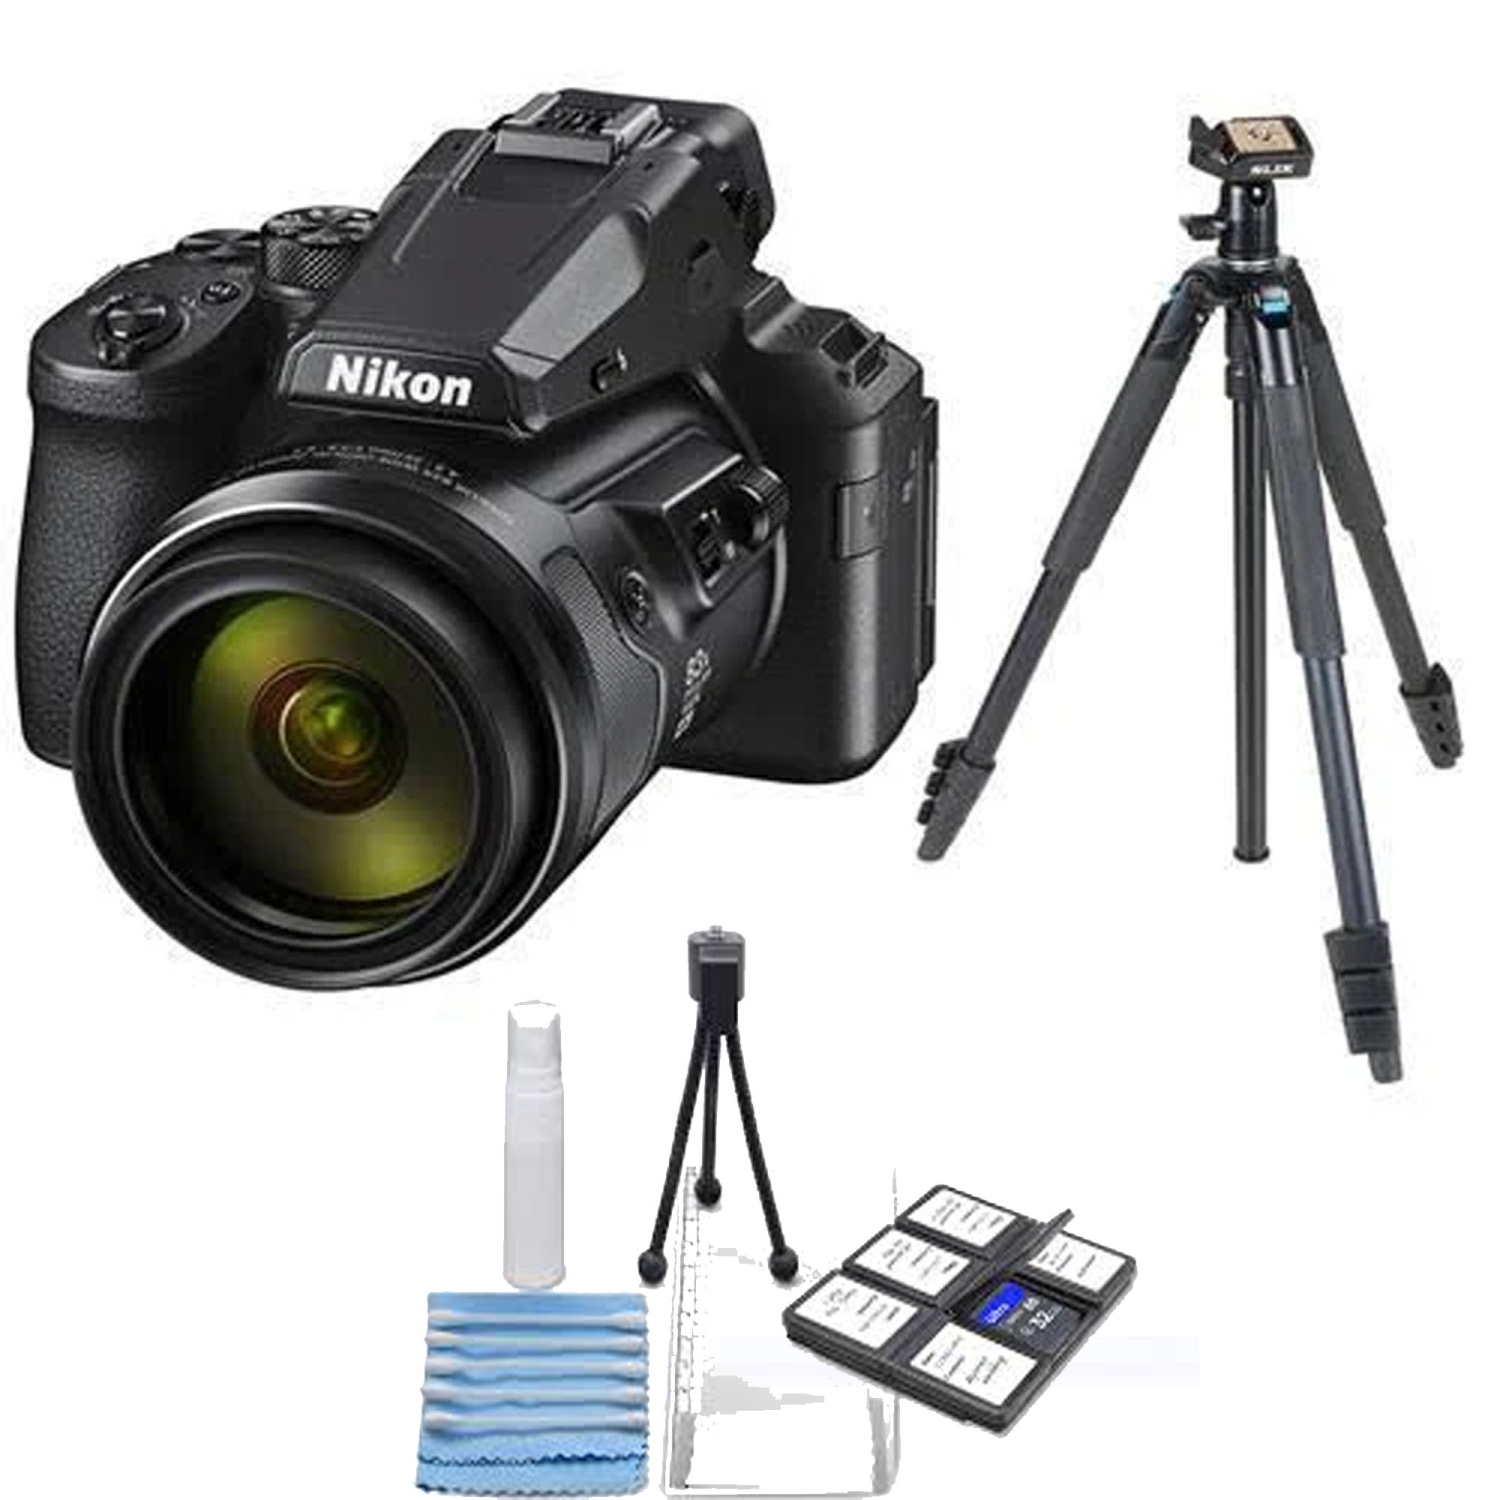 Nikon COOLPIX P950 Digital Camera with 72 Professional Tripod & Cleaning Kit - US Version w/ Seller Warranty